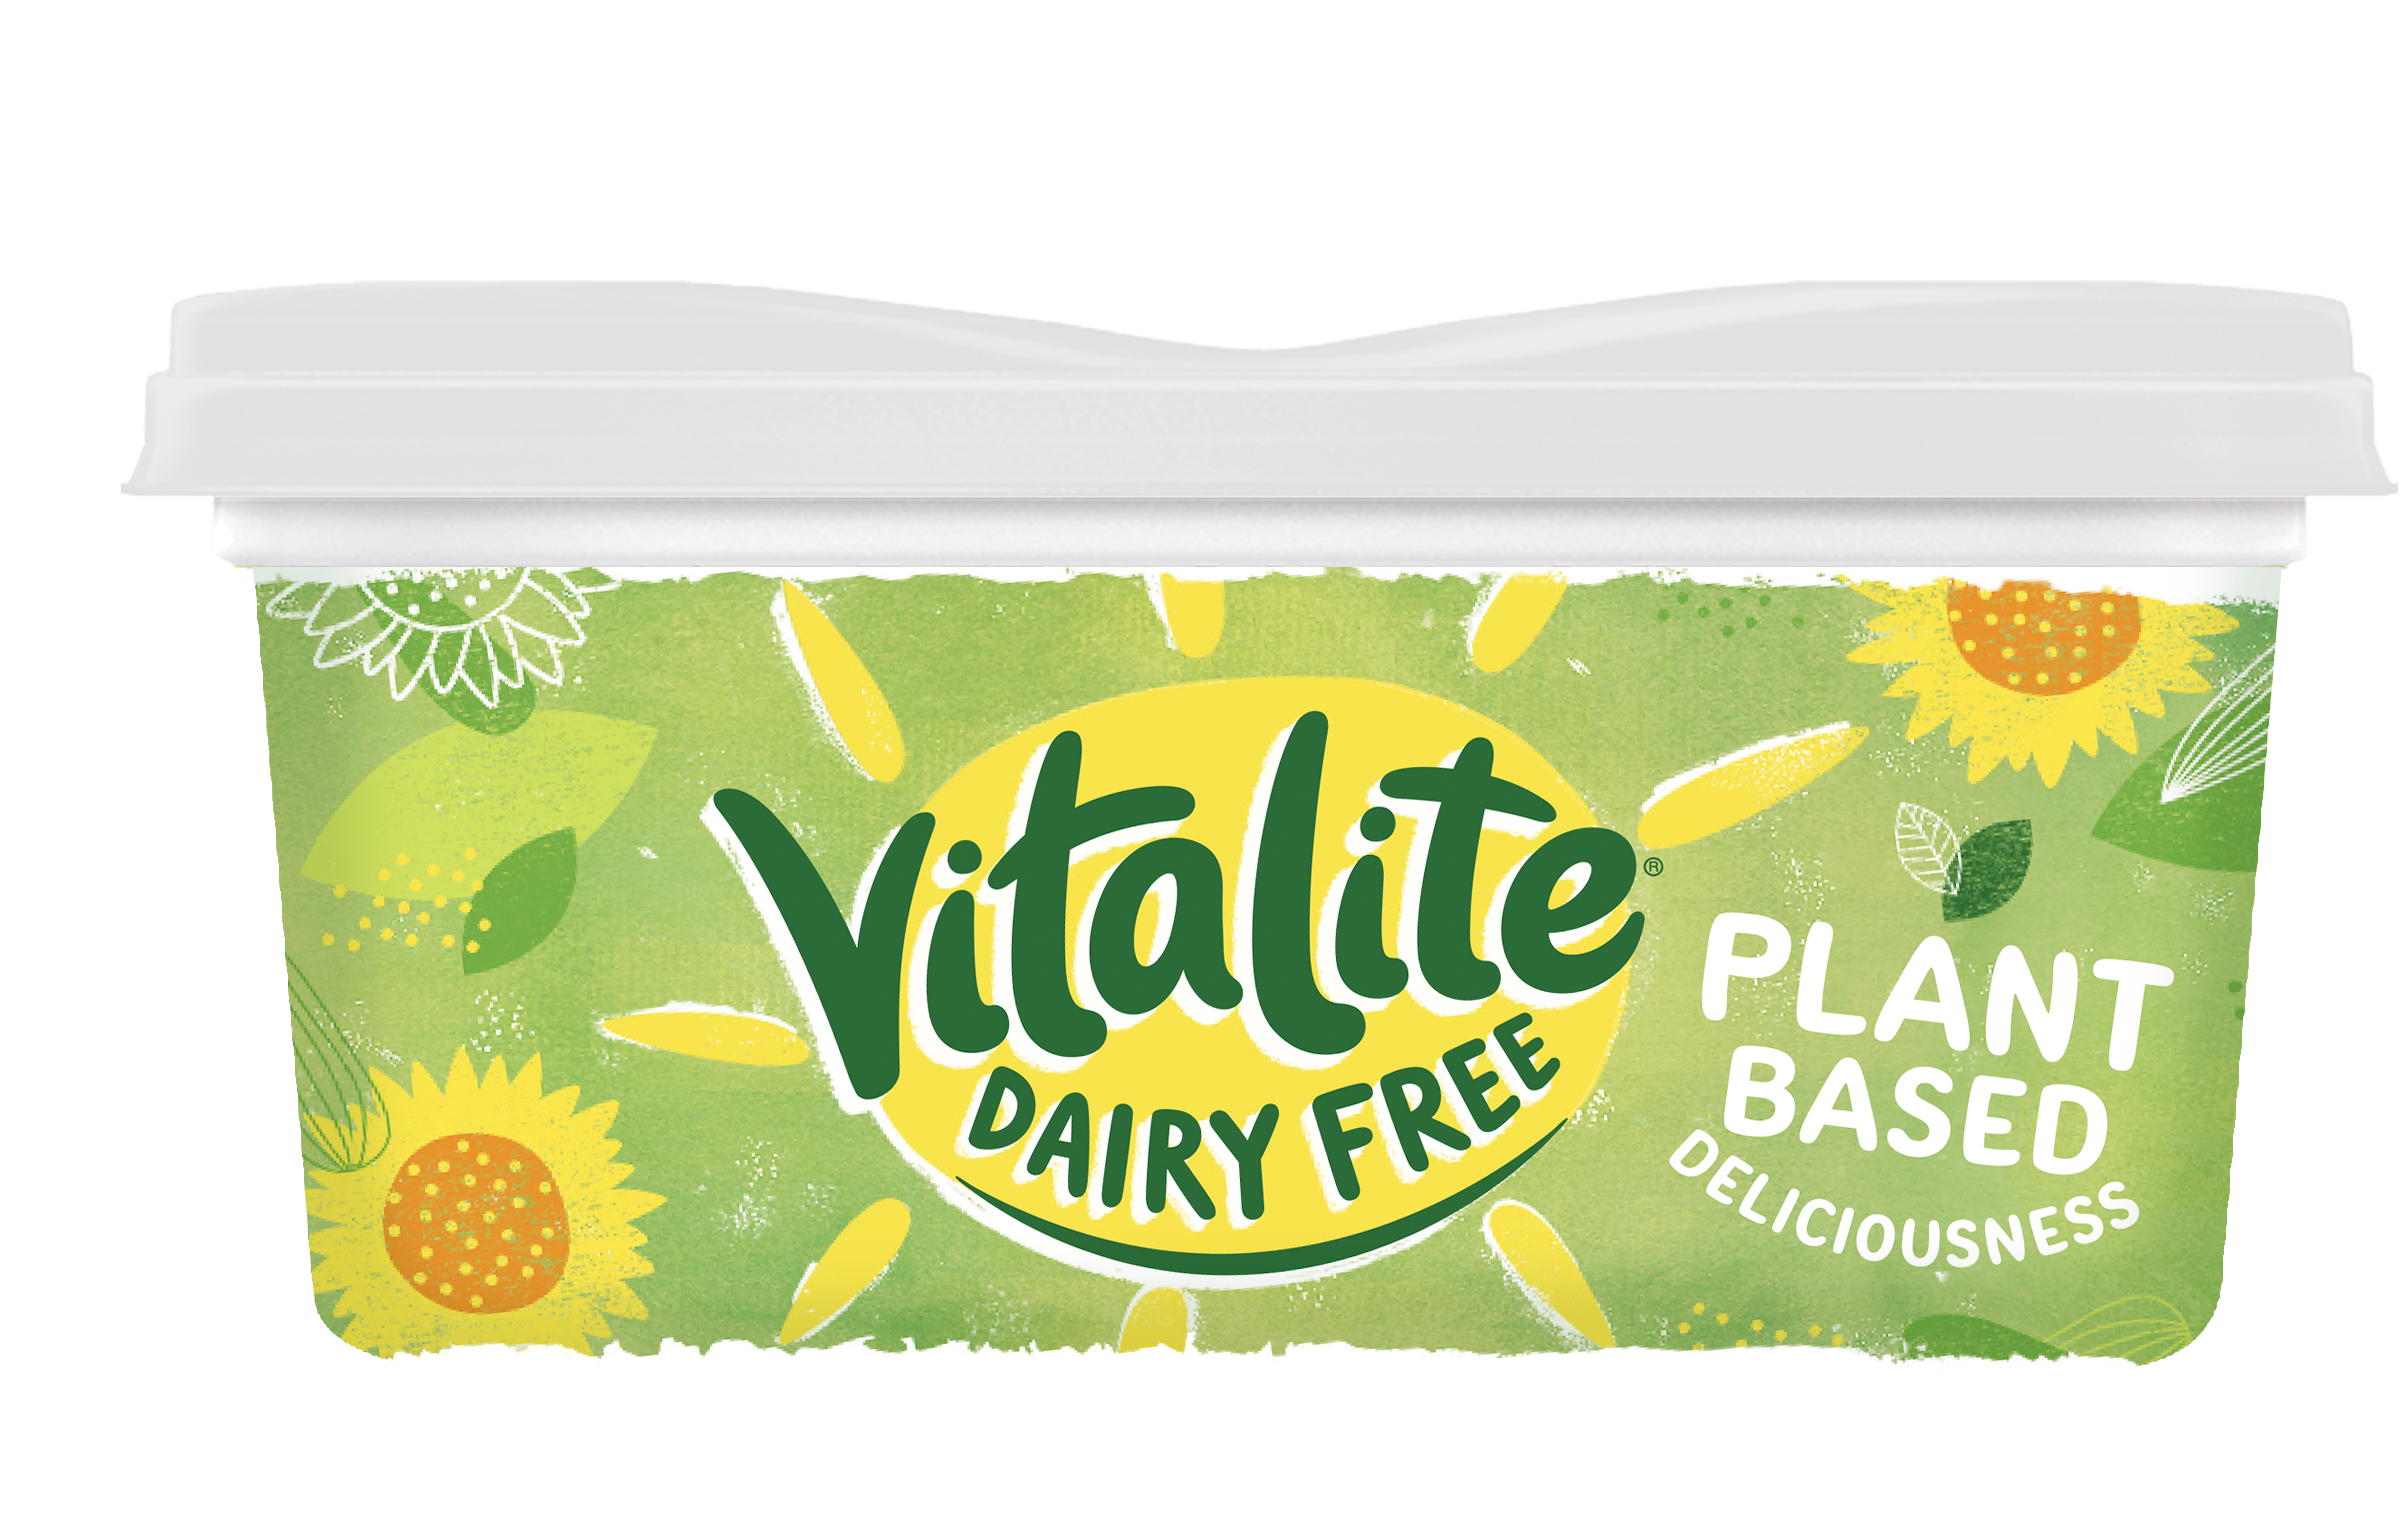 Vitalite updates packaging with plant-based messaging